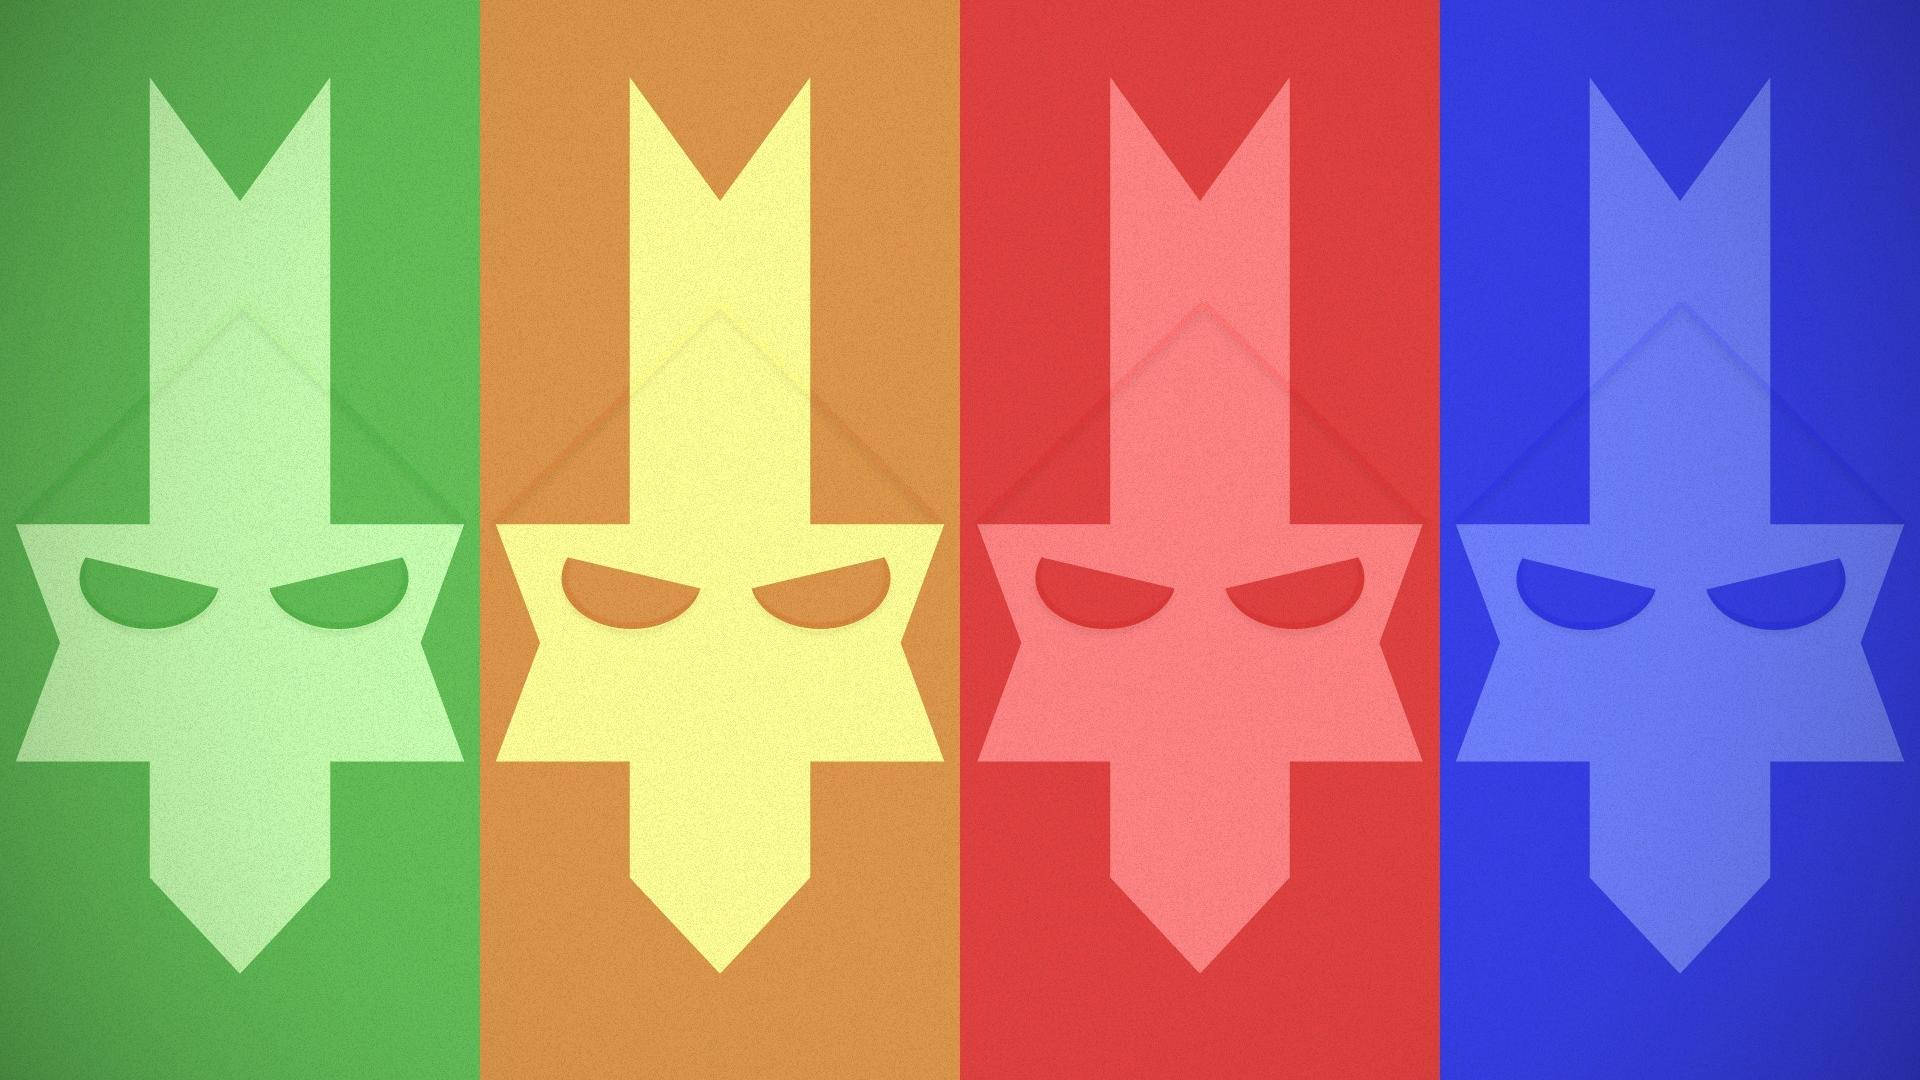 Castle Crashers Four Knights Faces Wallpaper